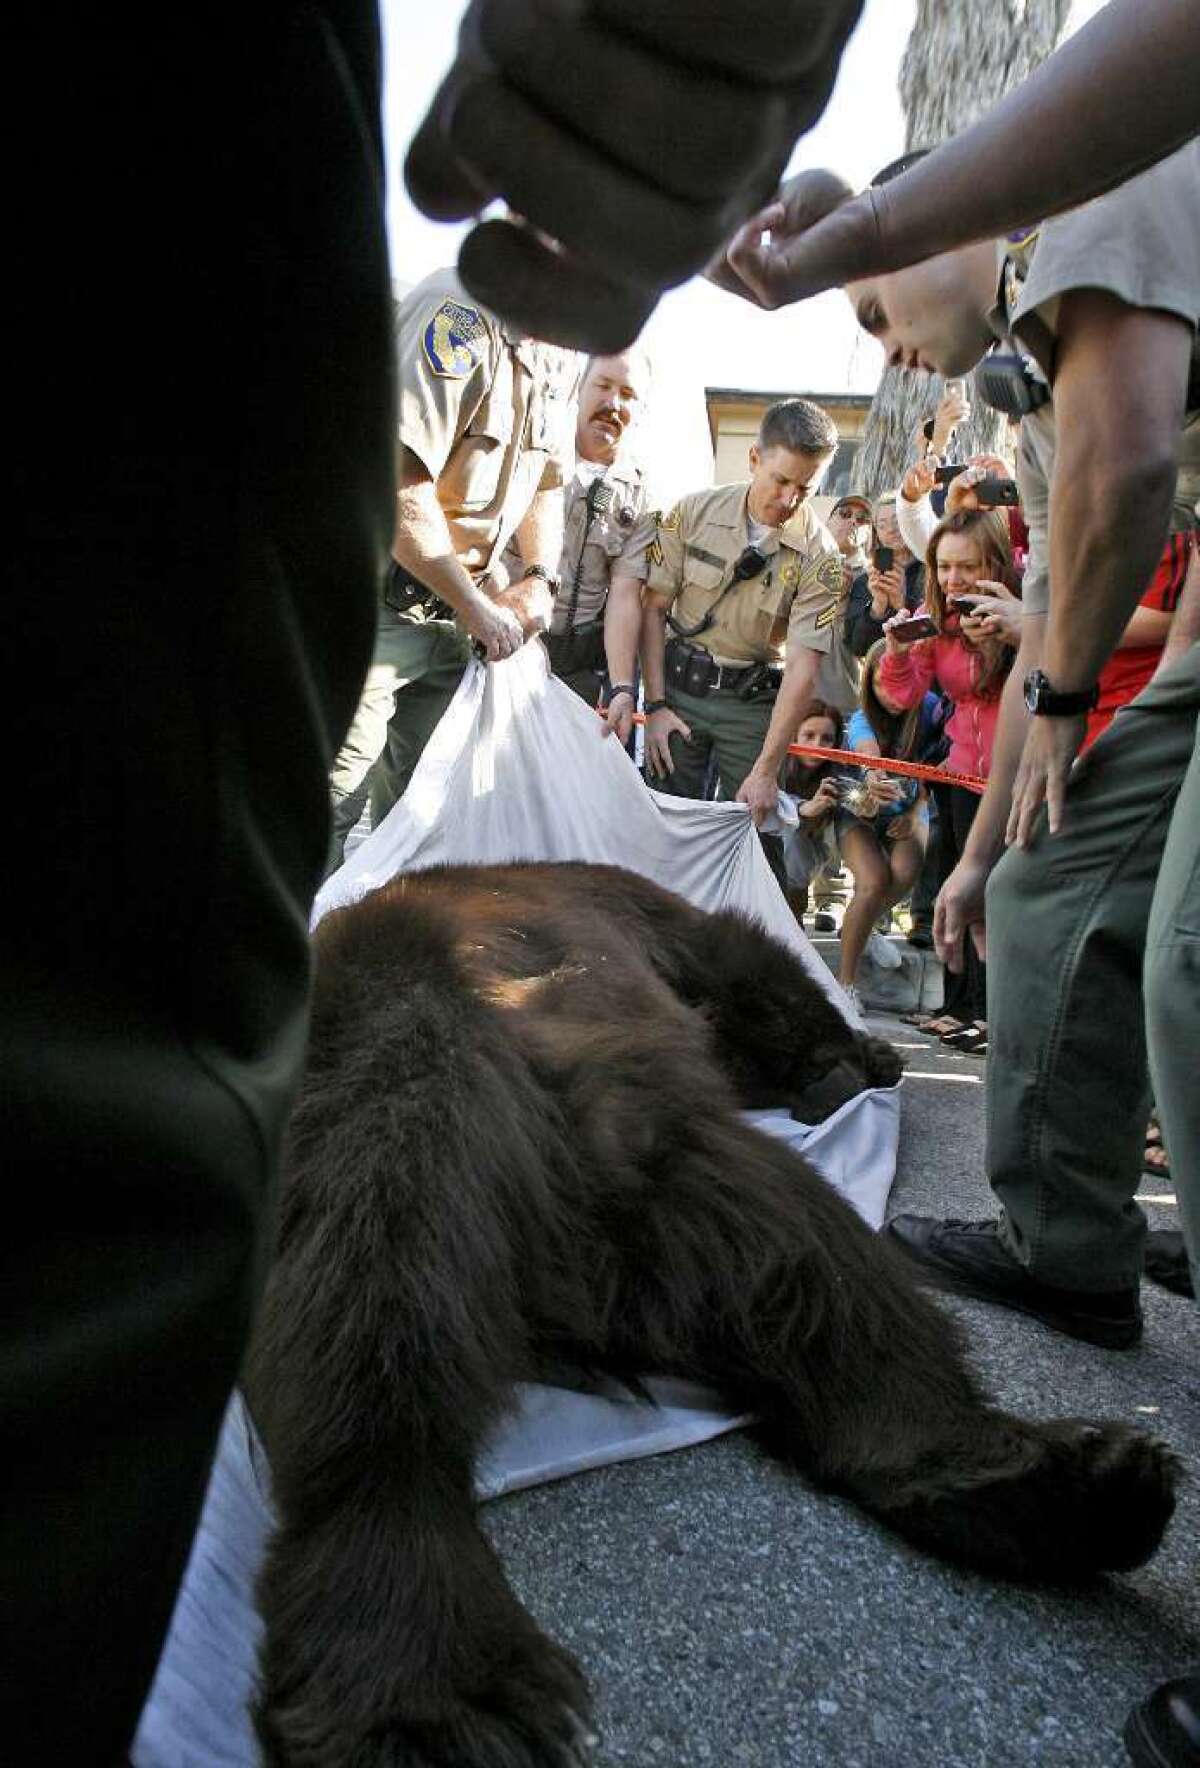 "Meatball" fans seize the moment in April 2012 to snap photos of the 400-pound black bear in La Crescenta.